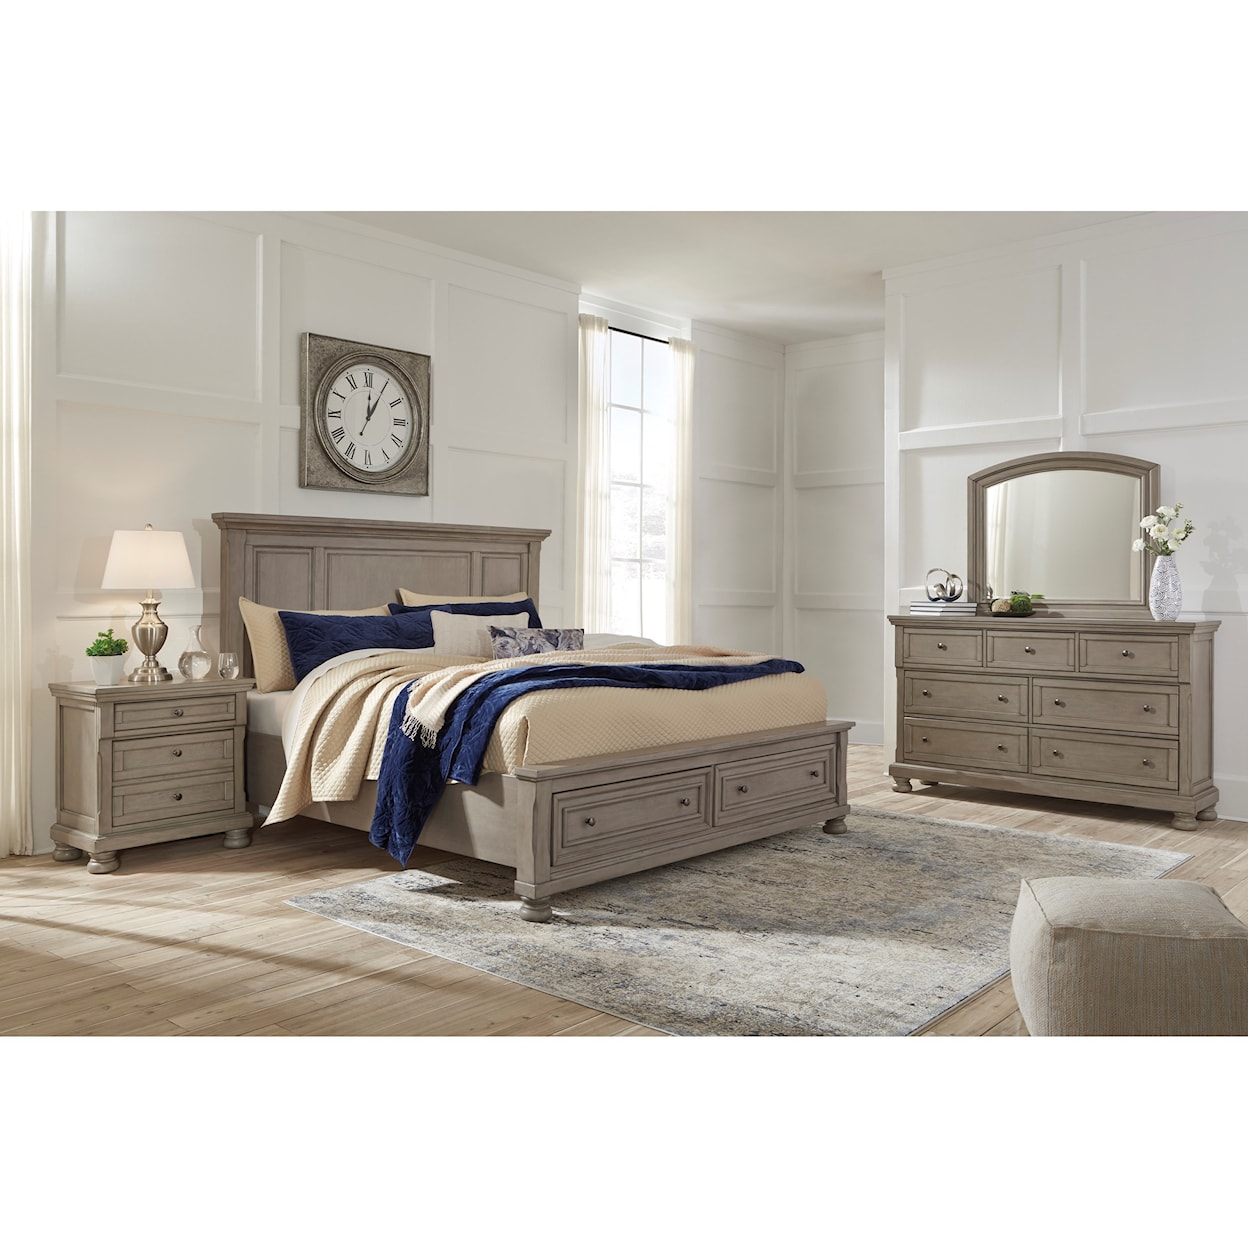 Signature Design by Ashley Lettner Queen Panel Bed with Storage Footboard